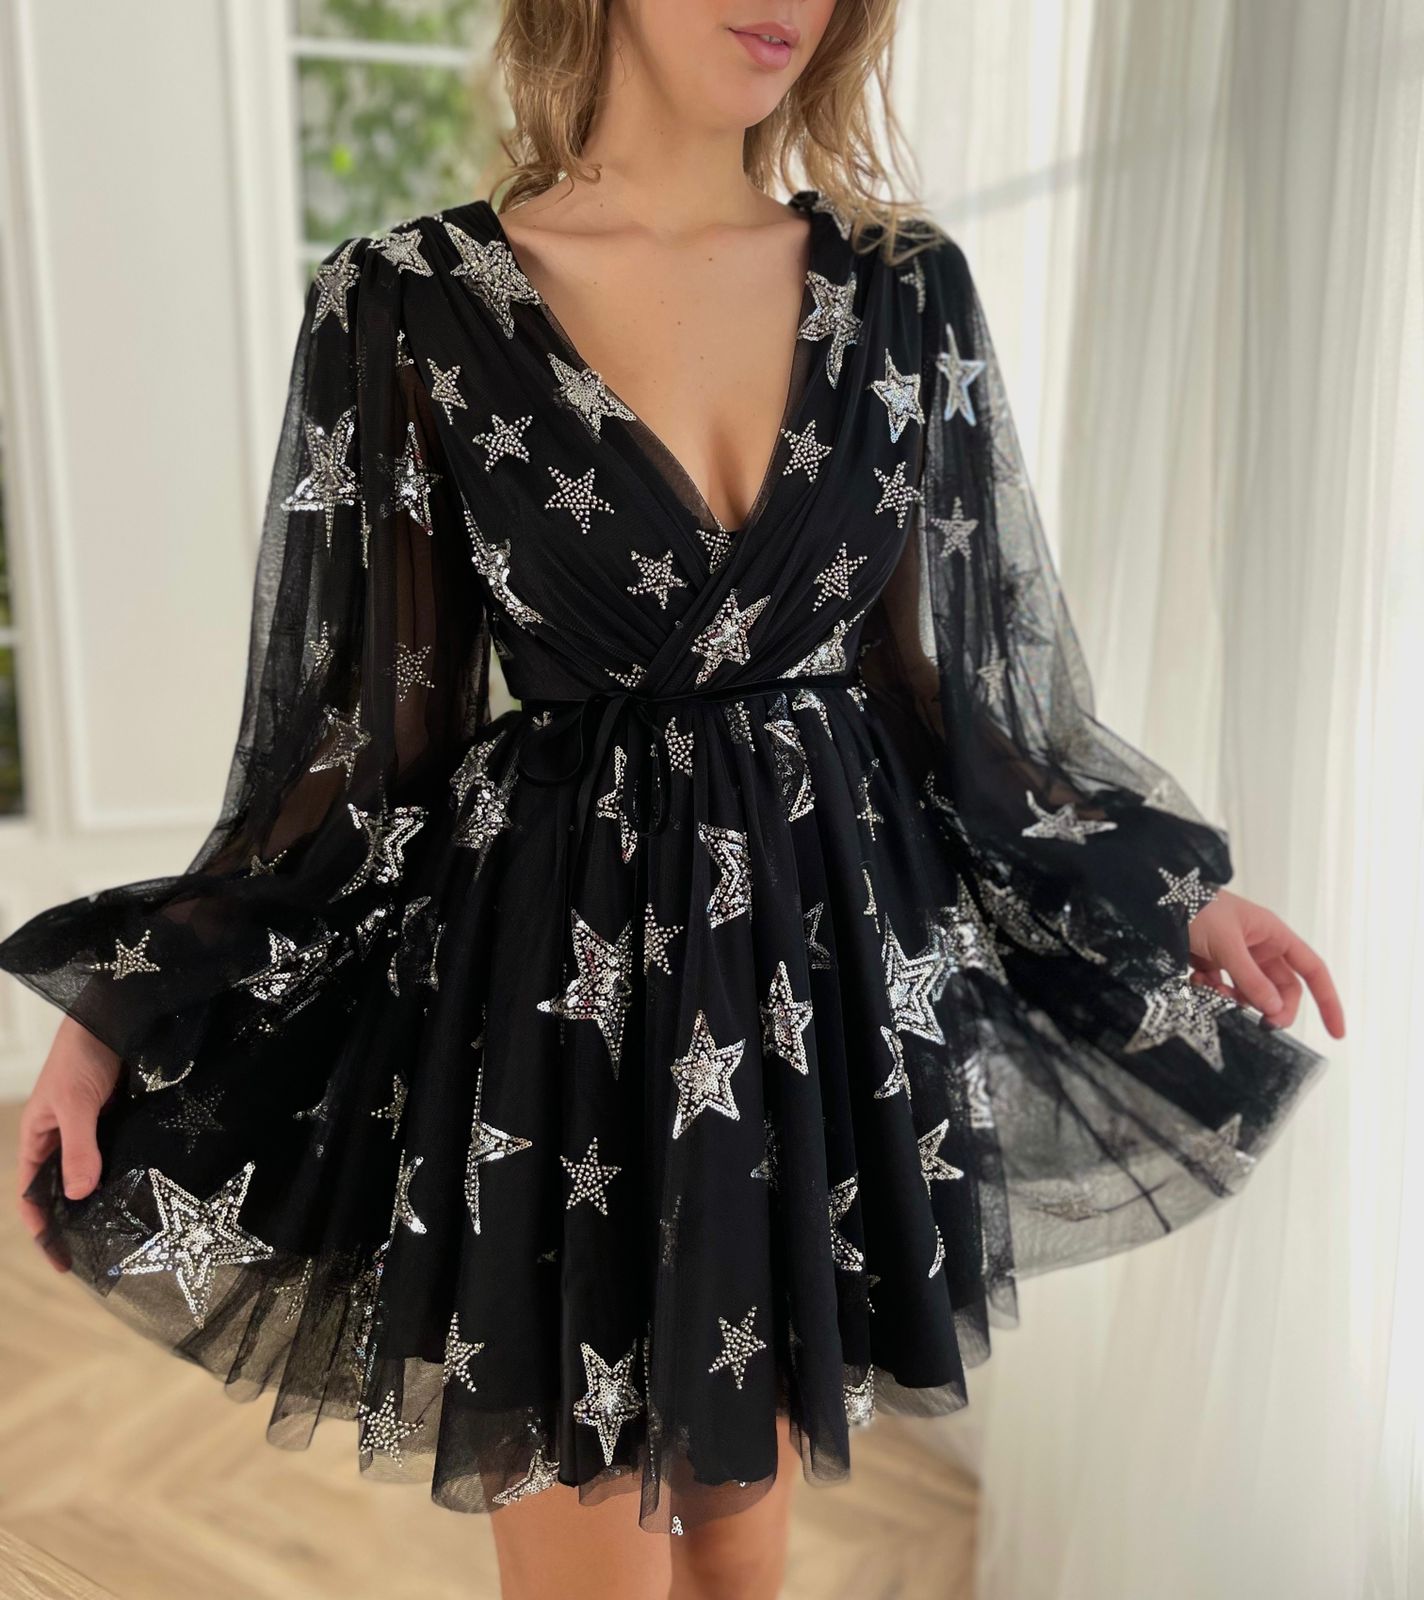 Black mini dress with v-neck, starry fabric and long sleeves